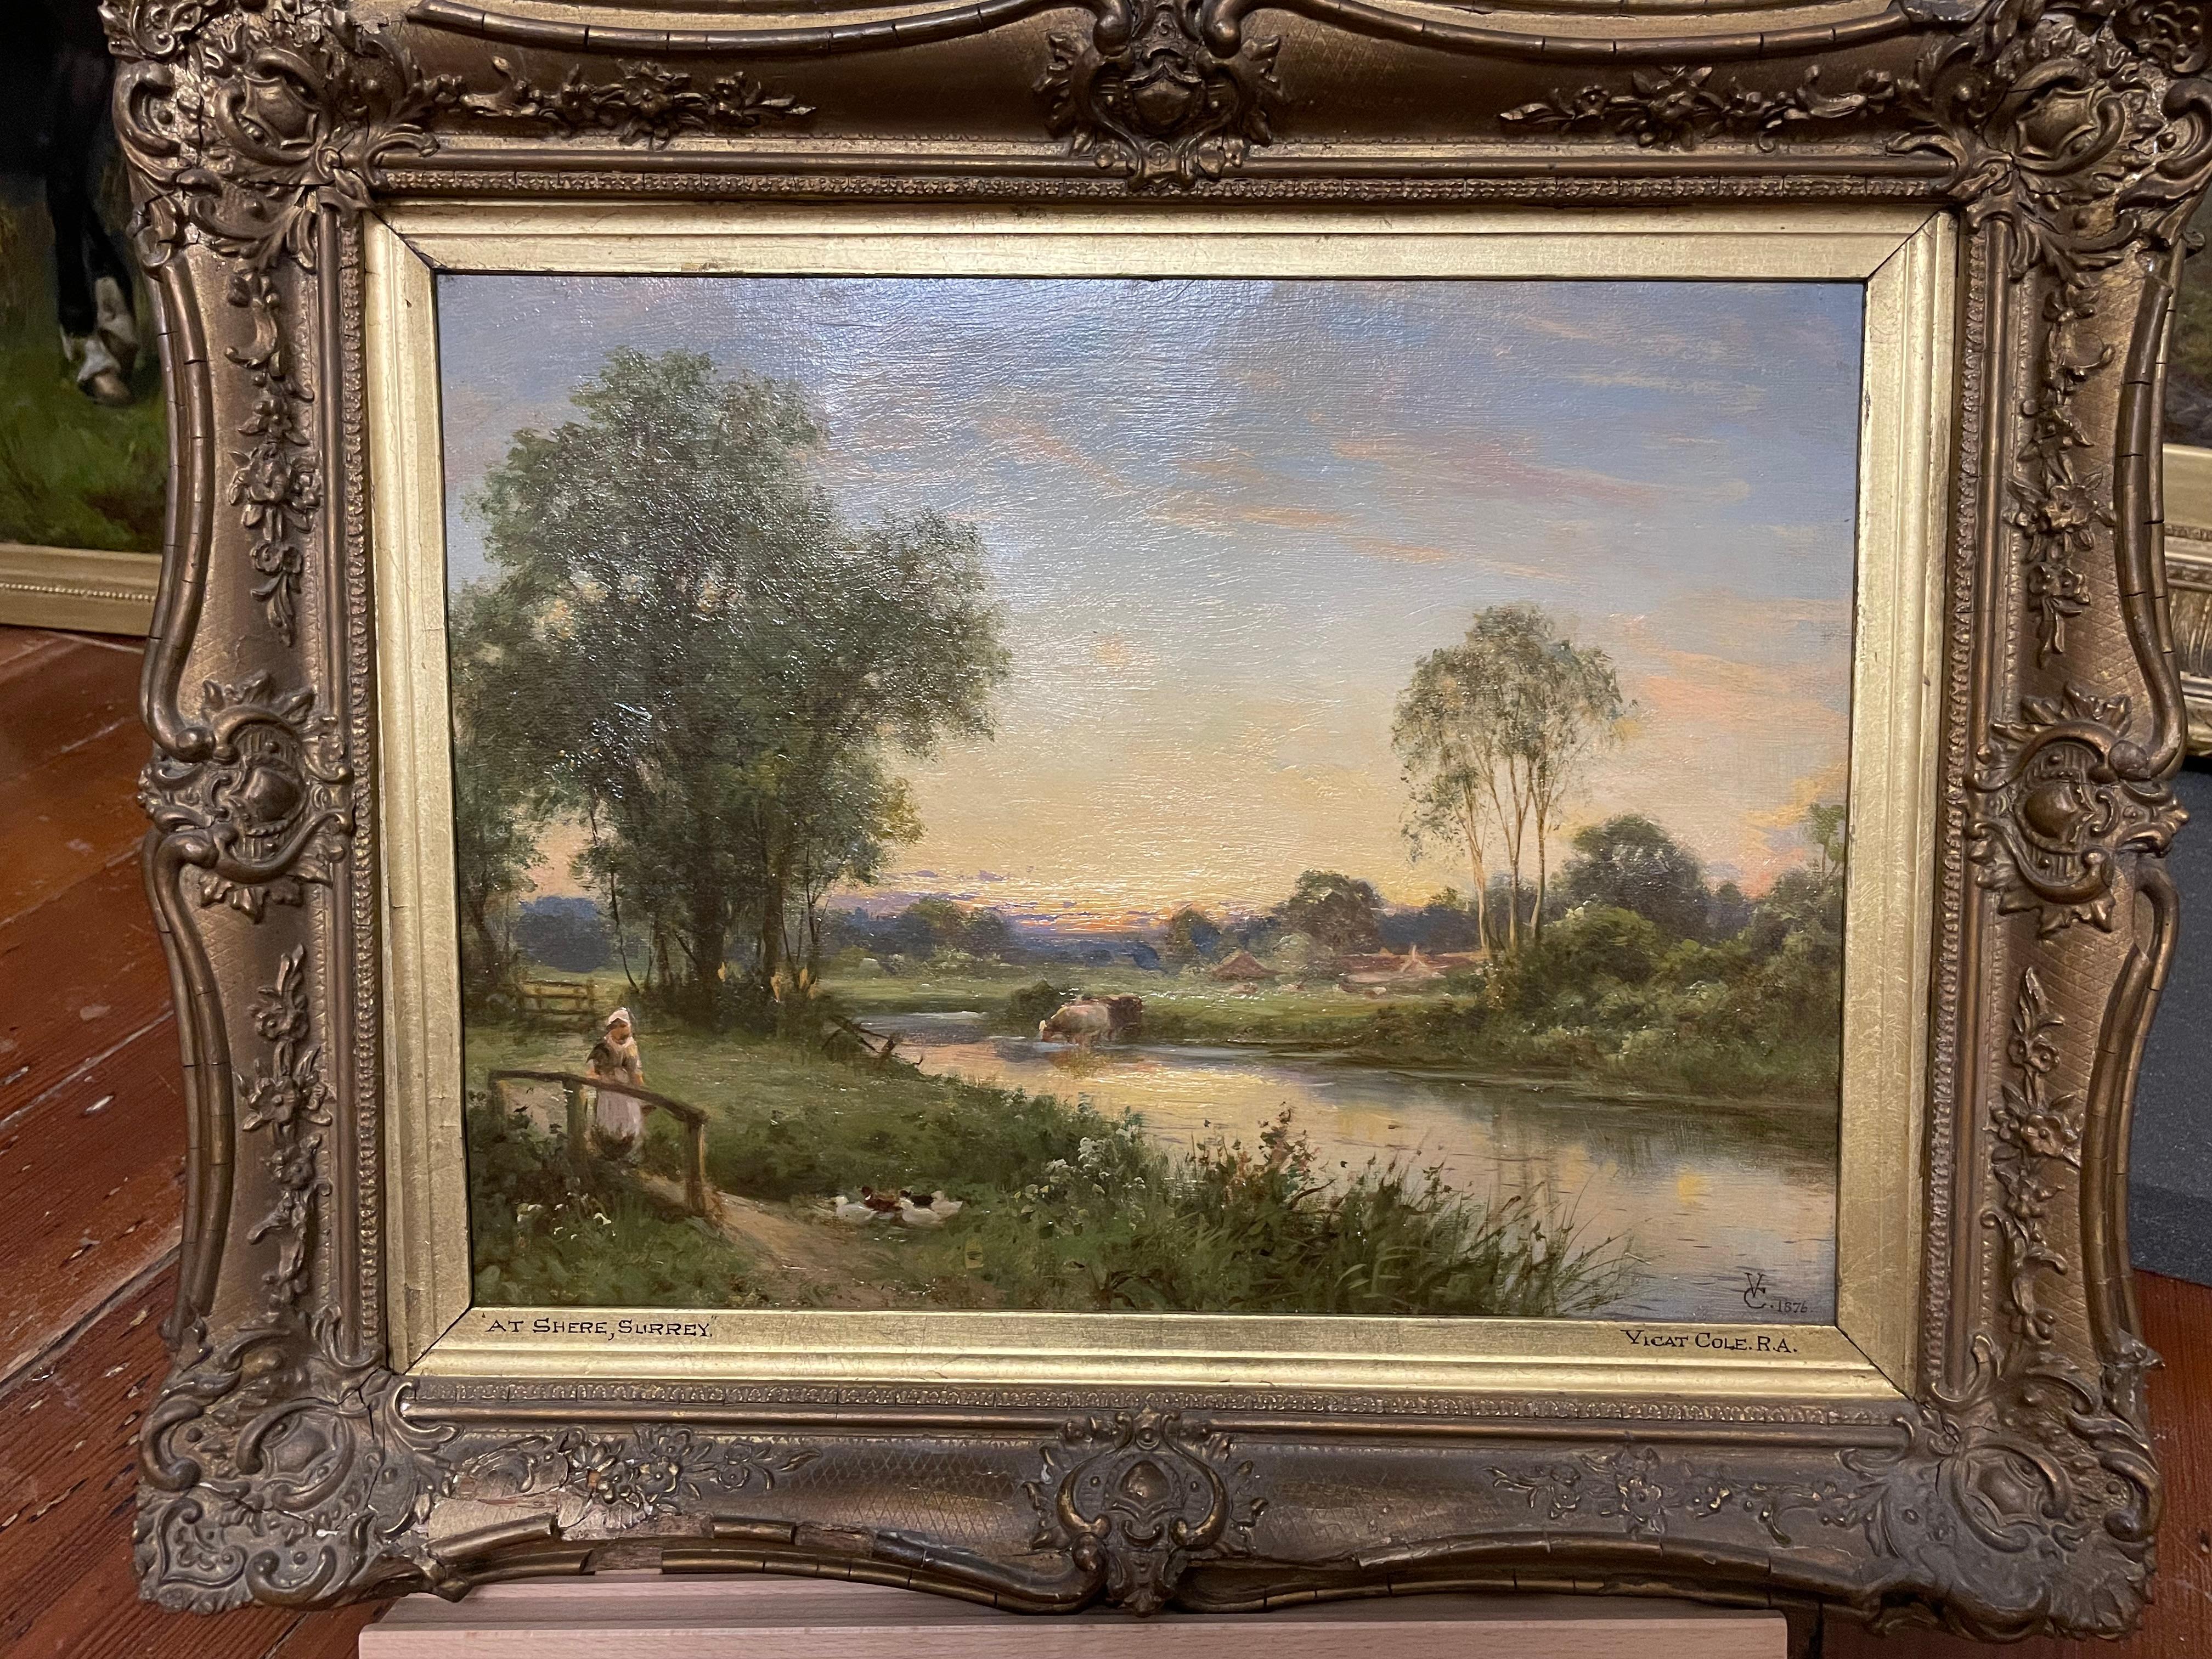 Shere, Surrey, 19th century landscape oil on canvas - Brown Landscape Painting by George Vicat Cole RA